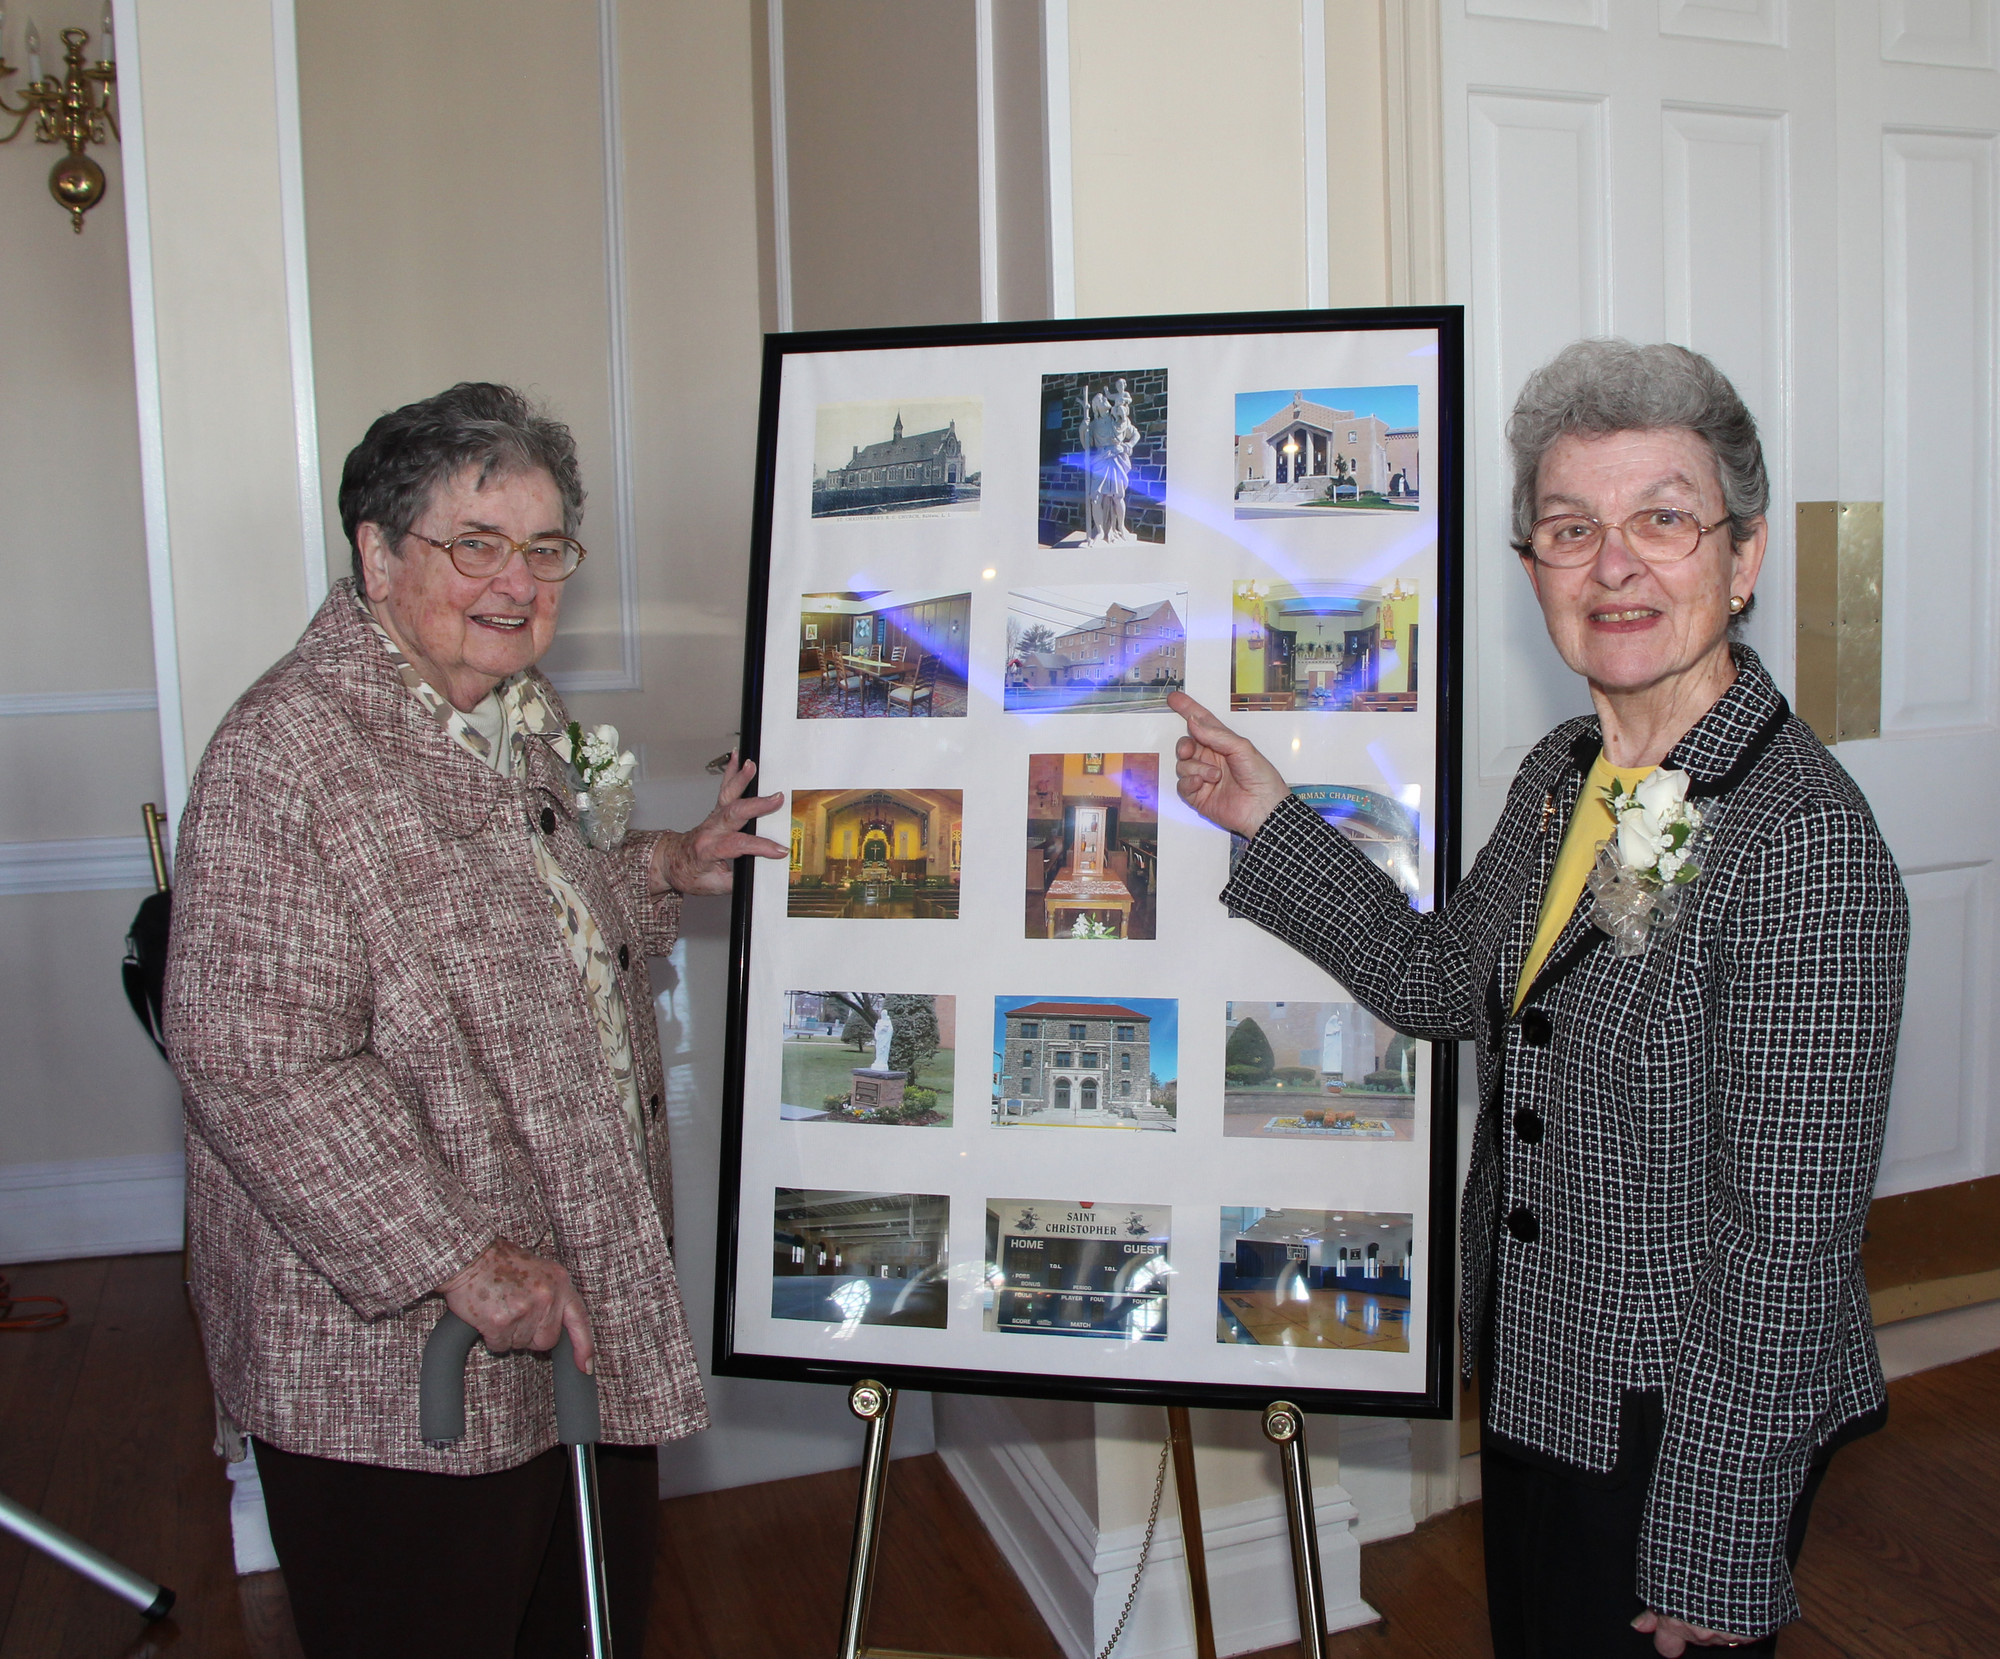 Sister Maria Finn, left, and Sister Joanne DeLaura reflected upon the rich history at St. Christopher’s Church.